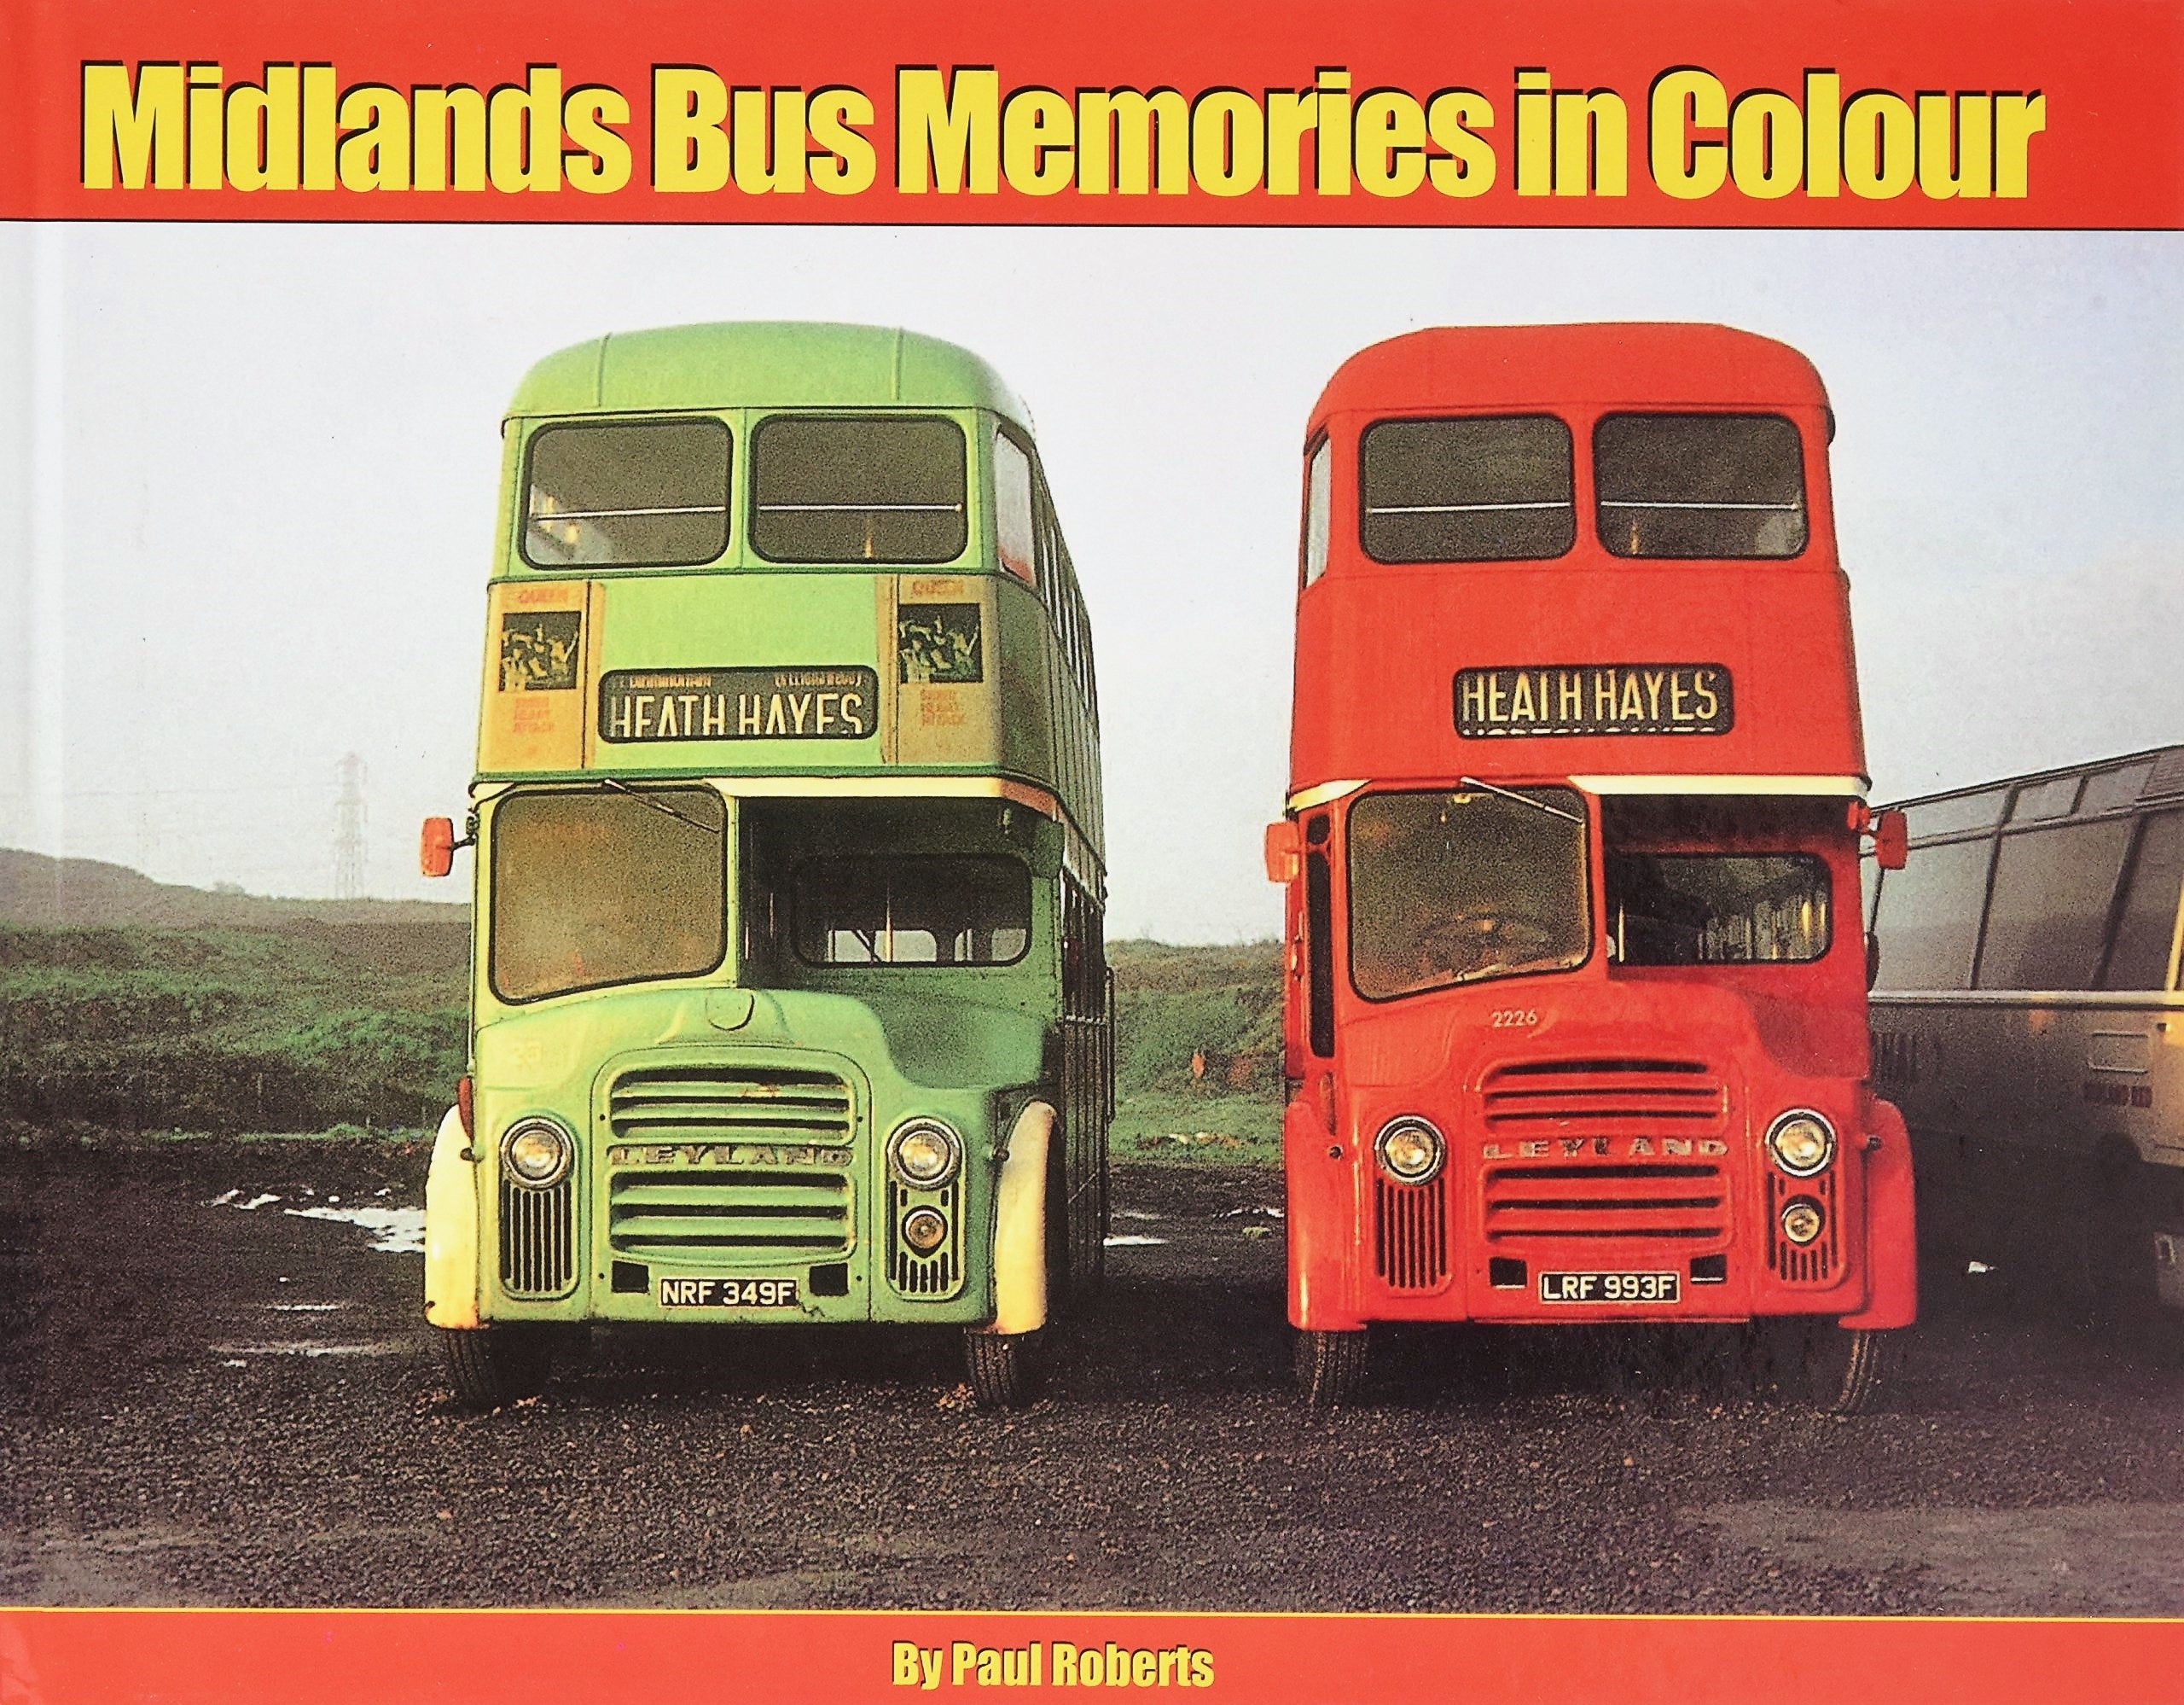 Midlands Bus Memories in Colour ALMOST SOLD OUT BE QUICK